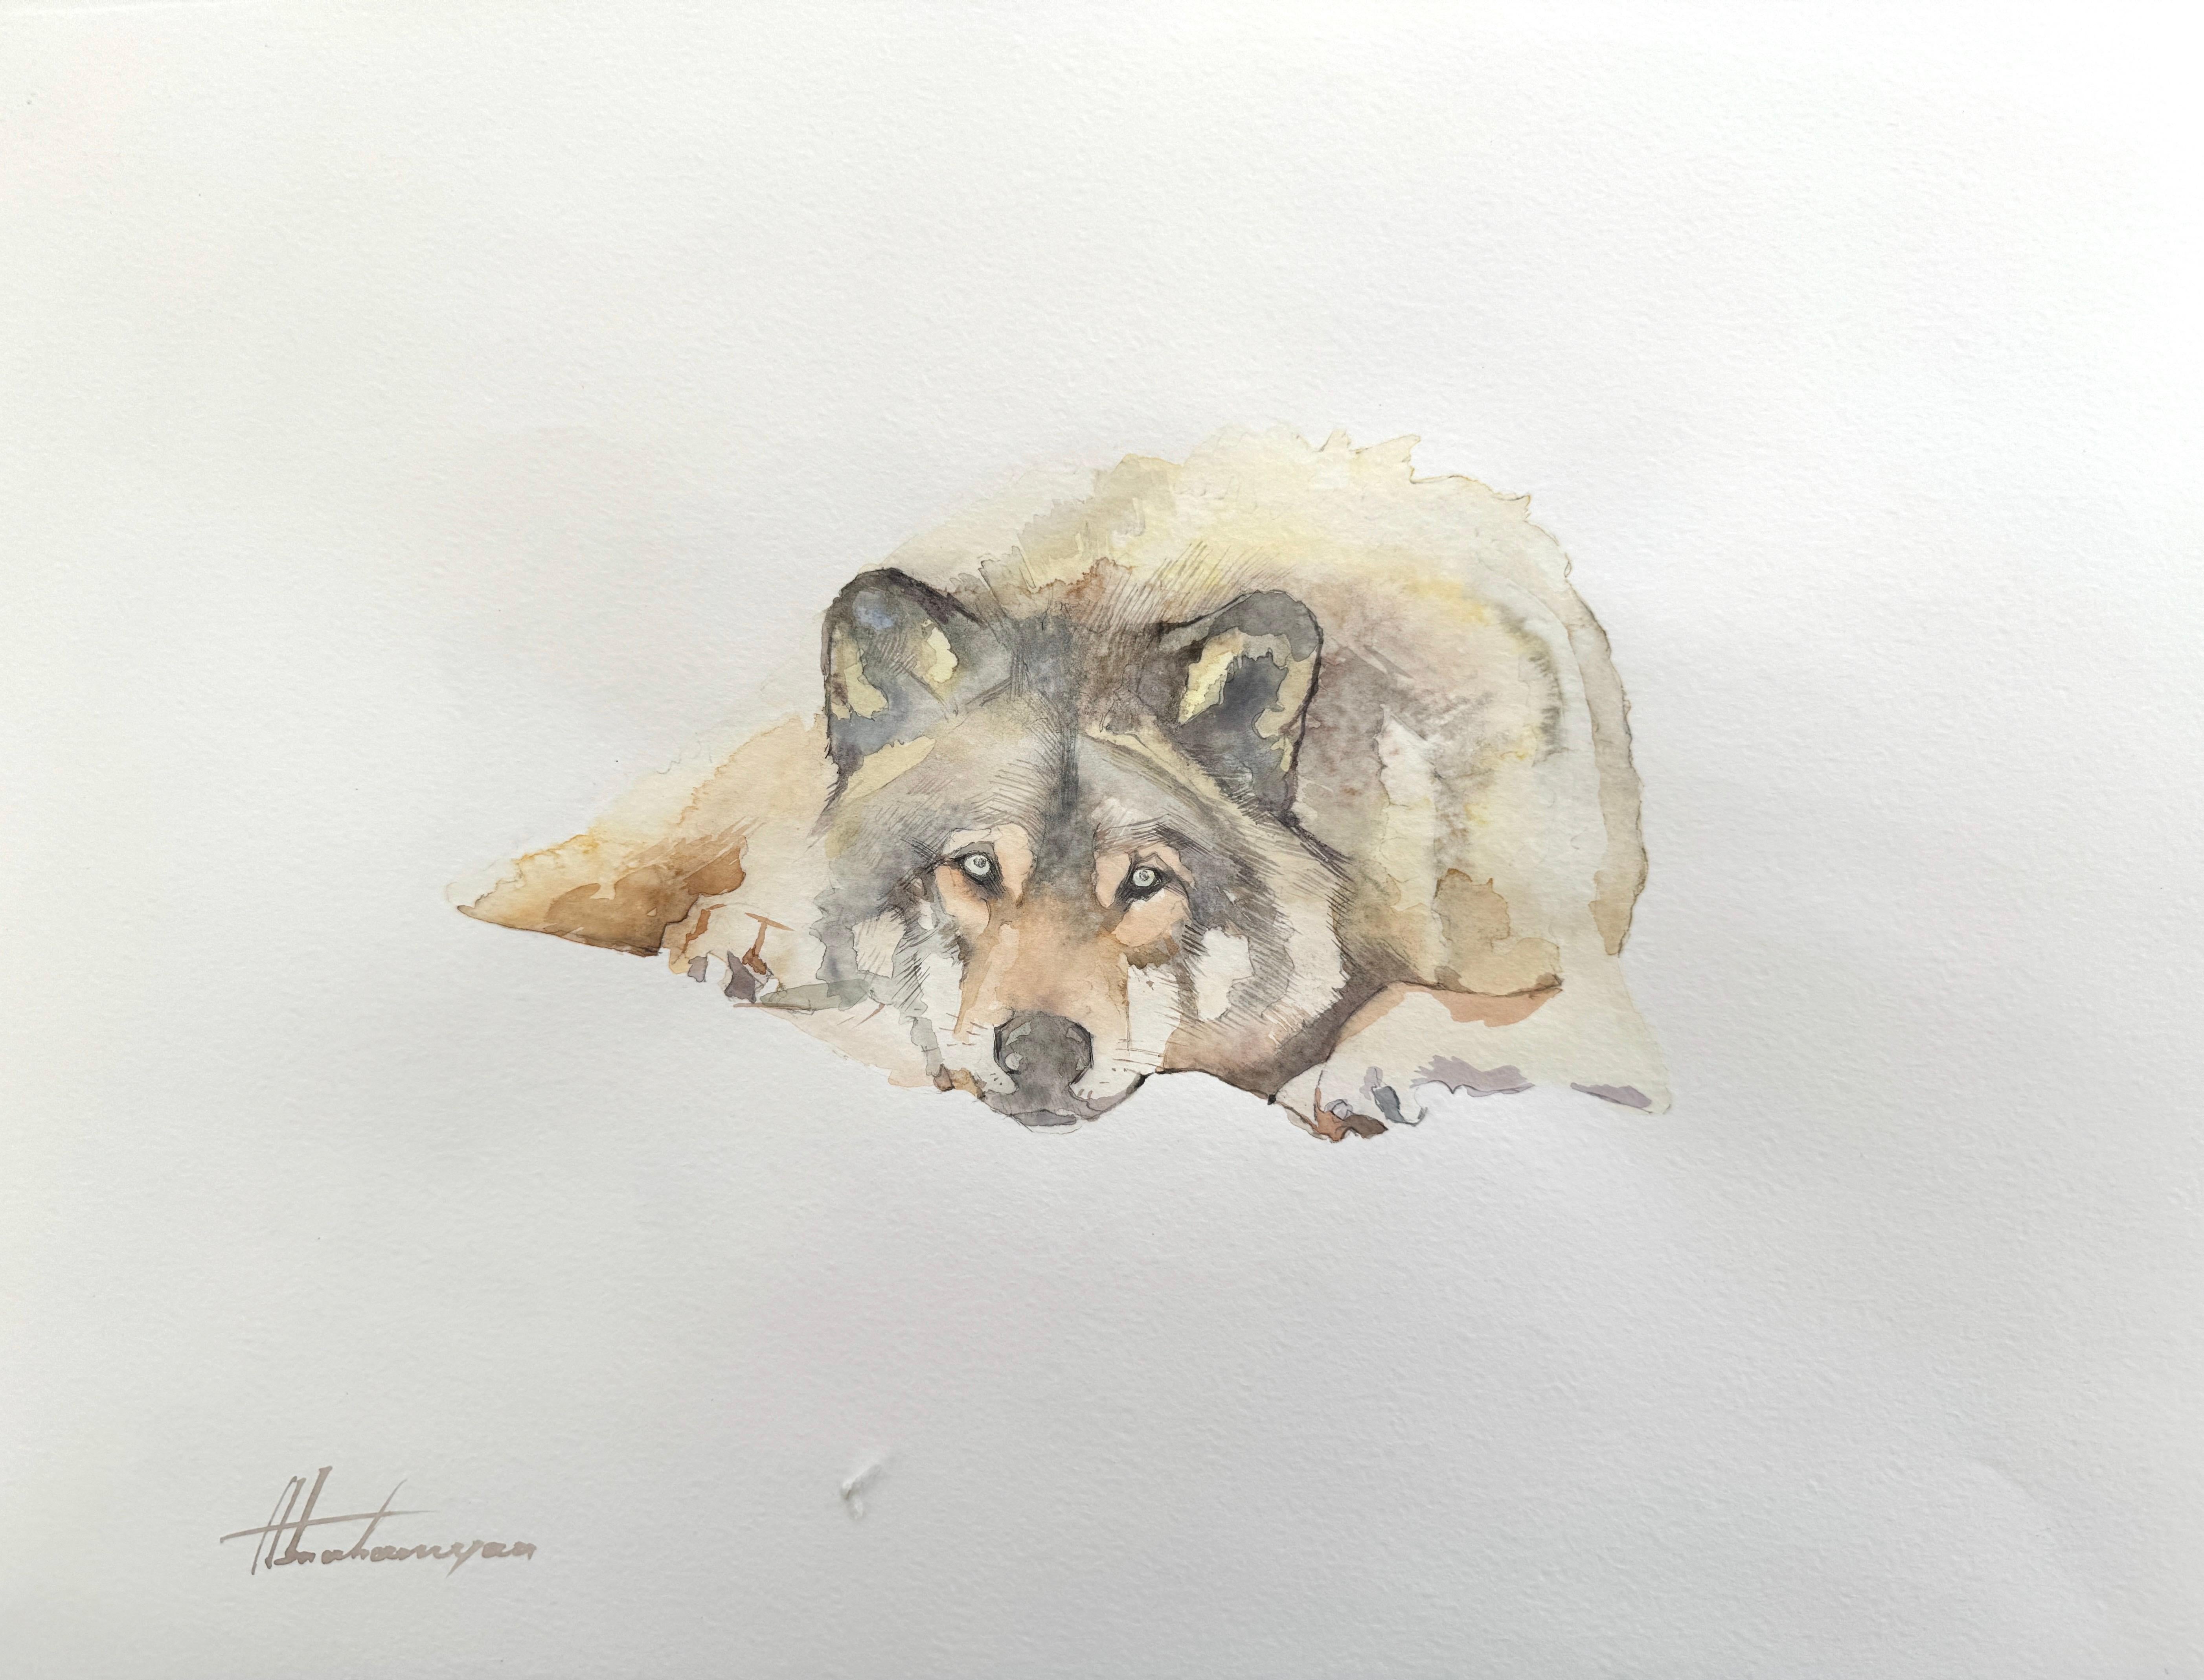 Artyom Abrahamyan Animal Art - Wolf, Animal Watercolor on Paper, Handmade Painting, One of a Kind